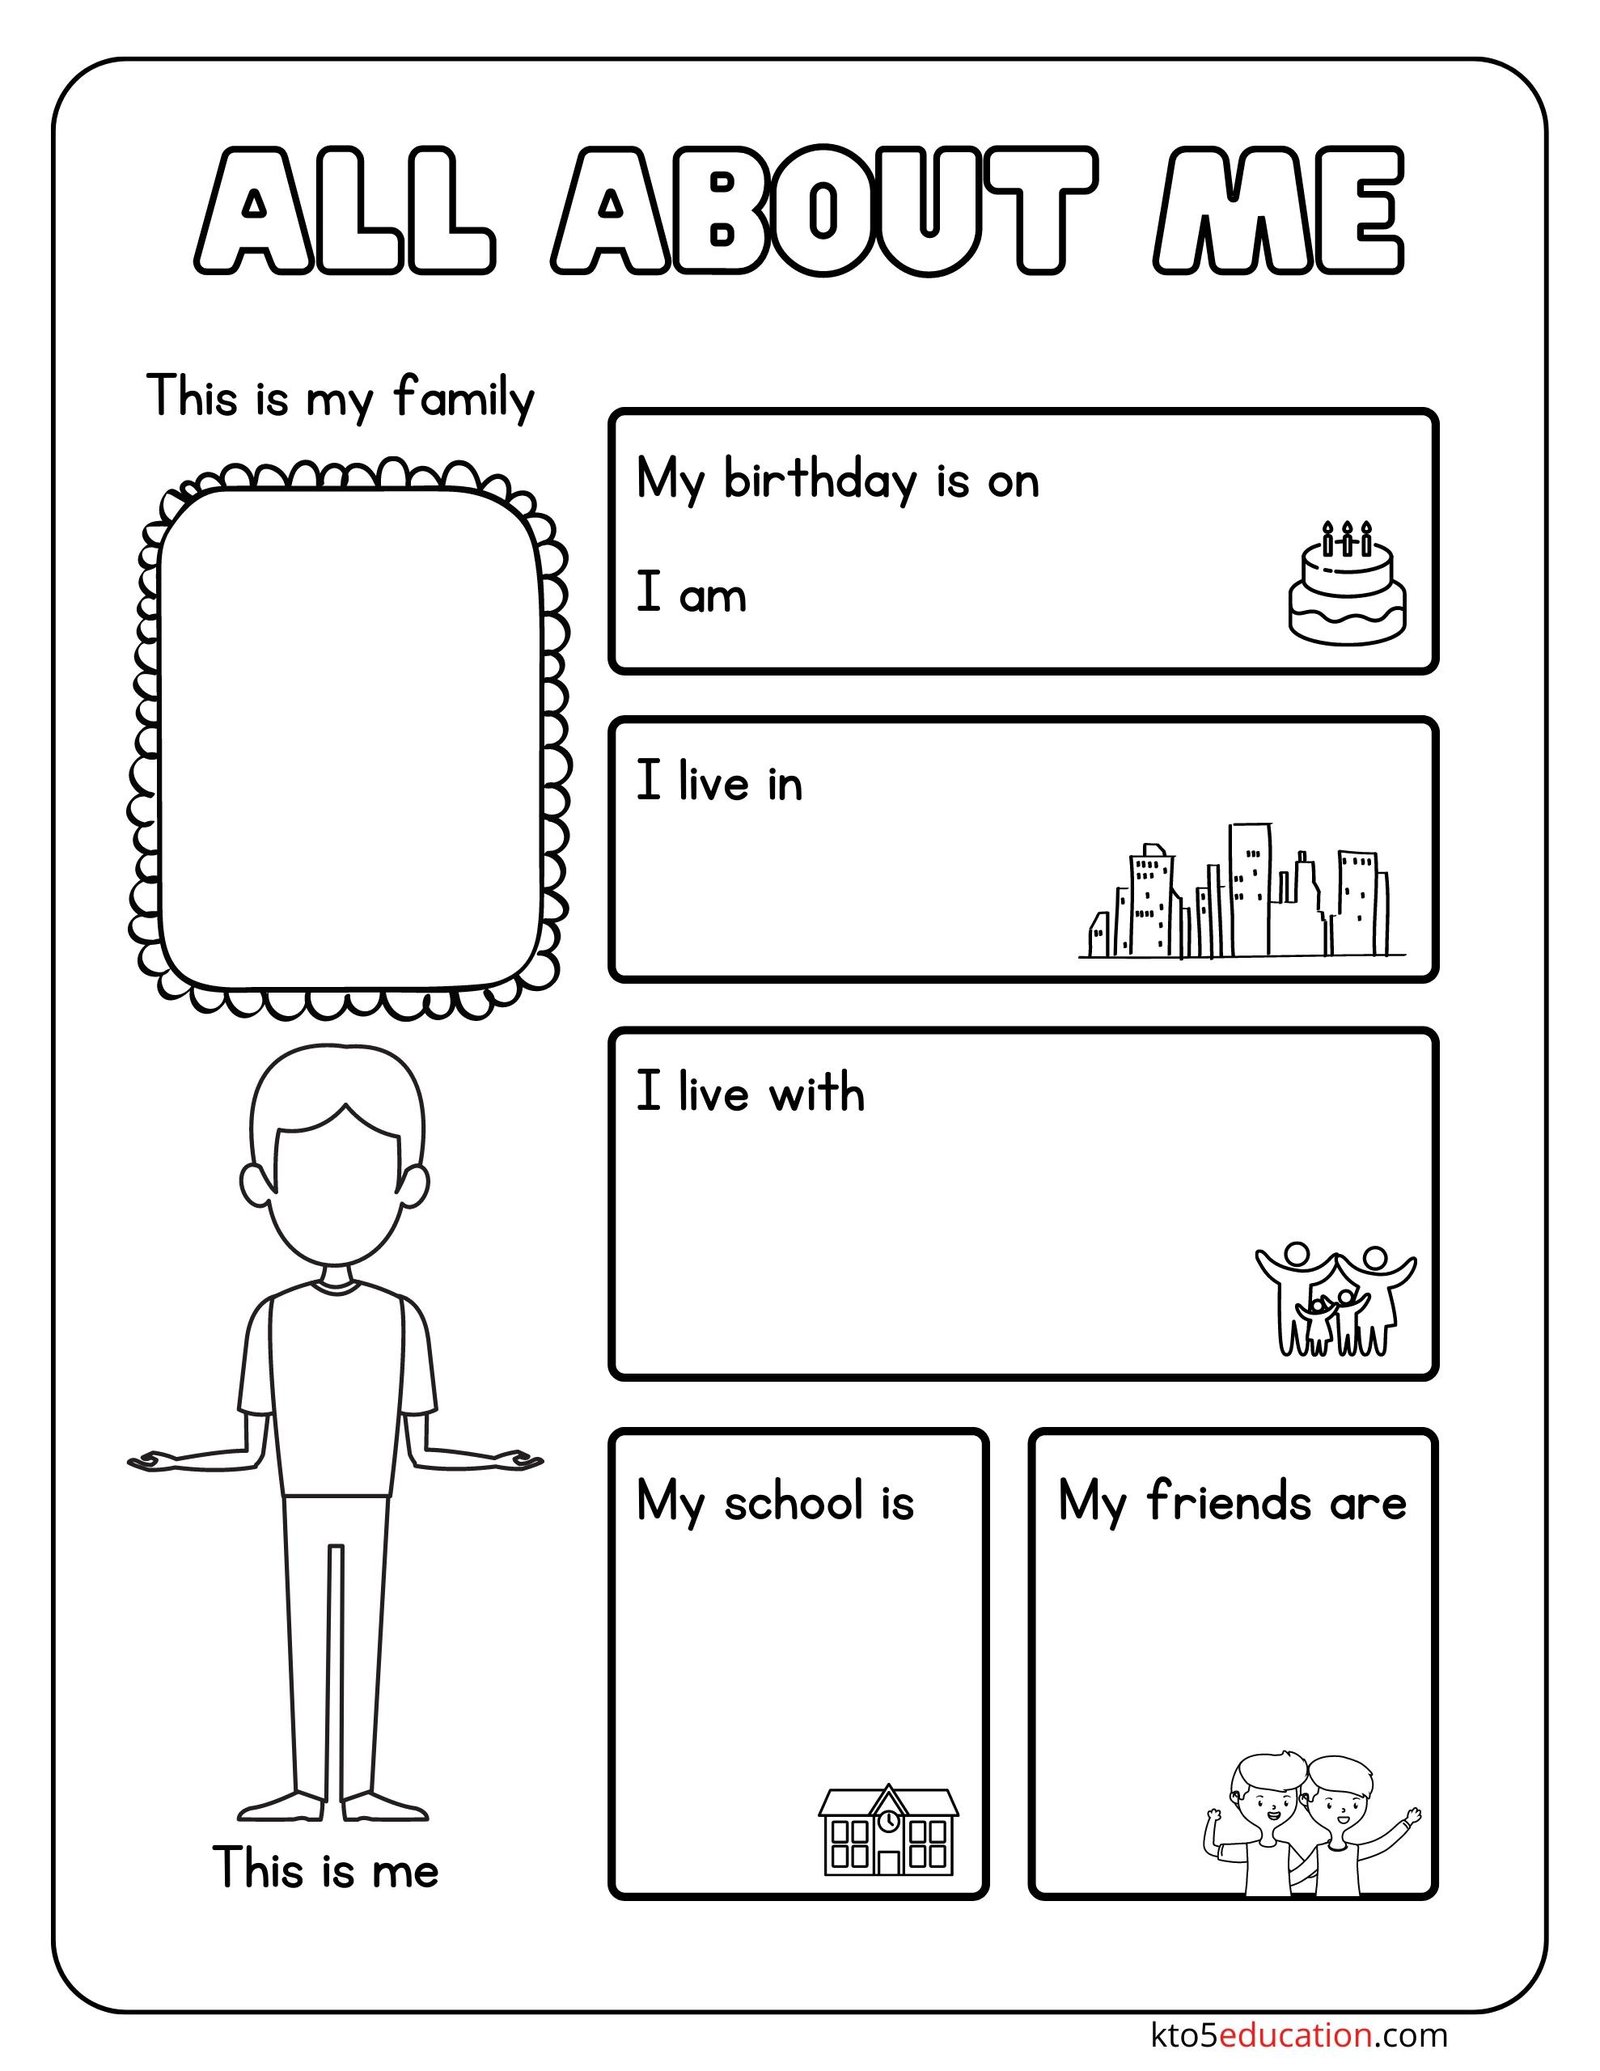 Preschool All About Me Worksheets